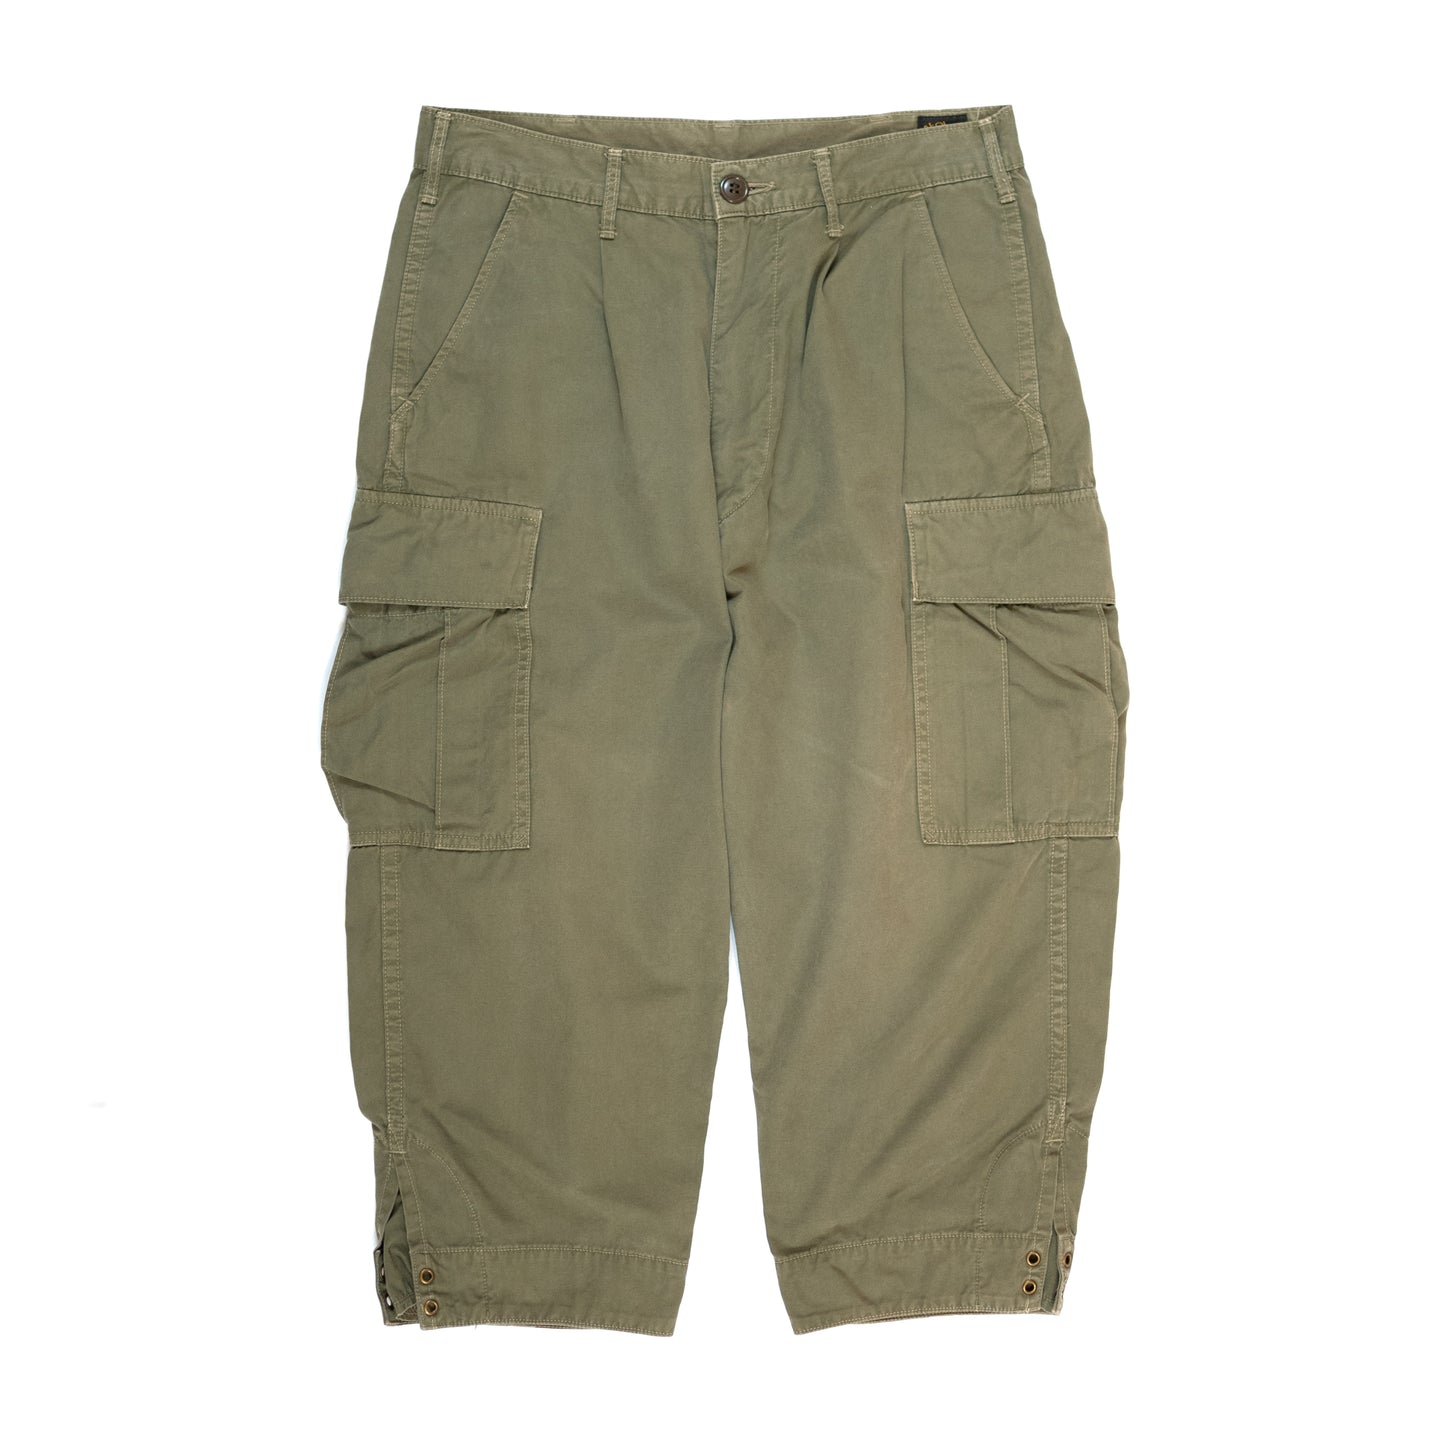 OrSlow Cropped Cargo Pants